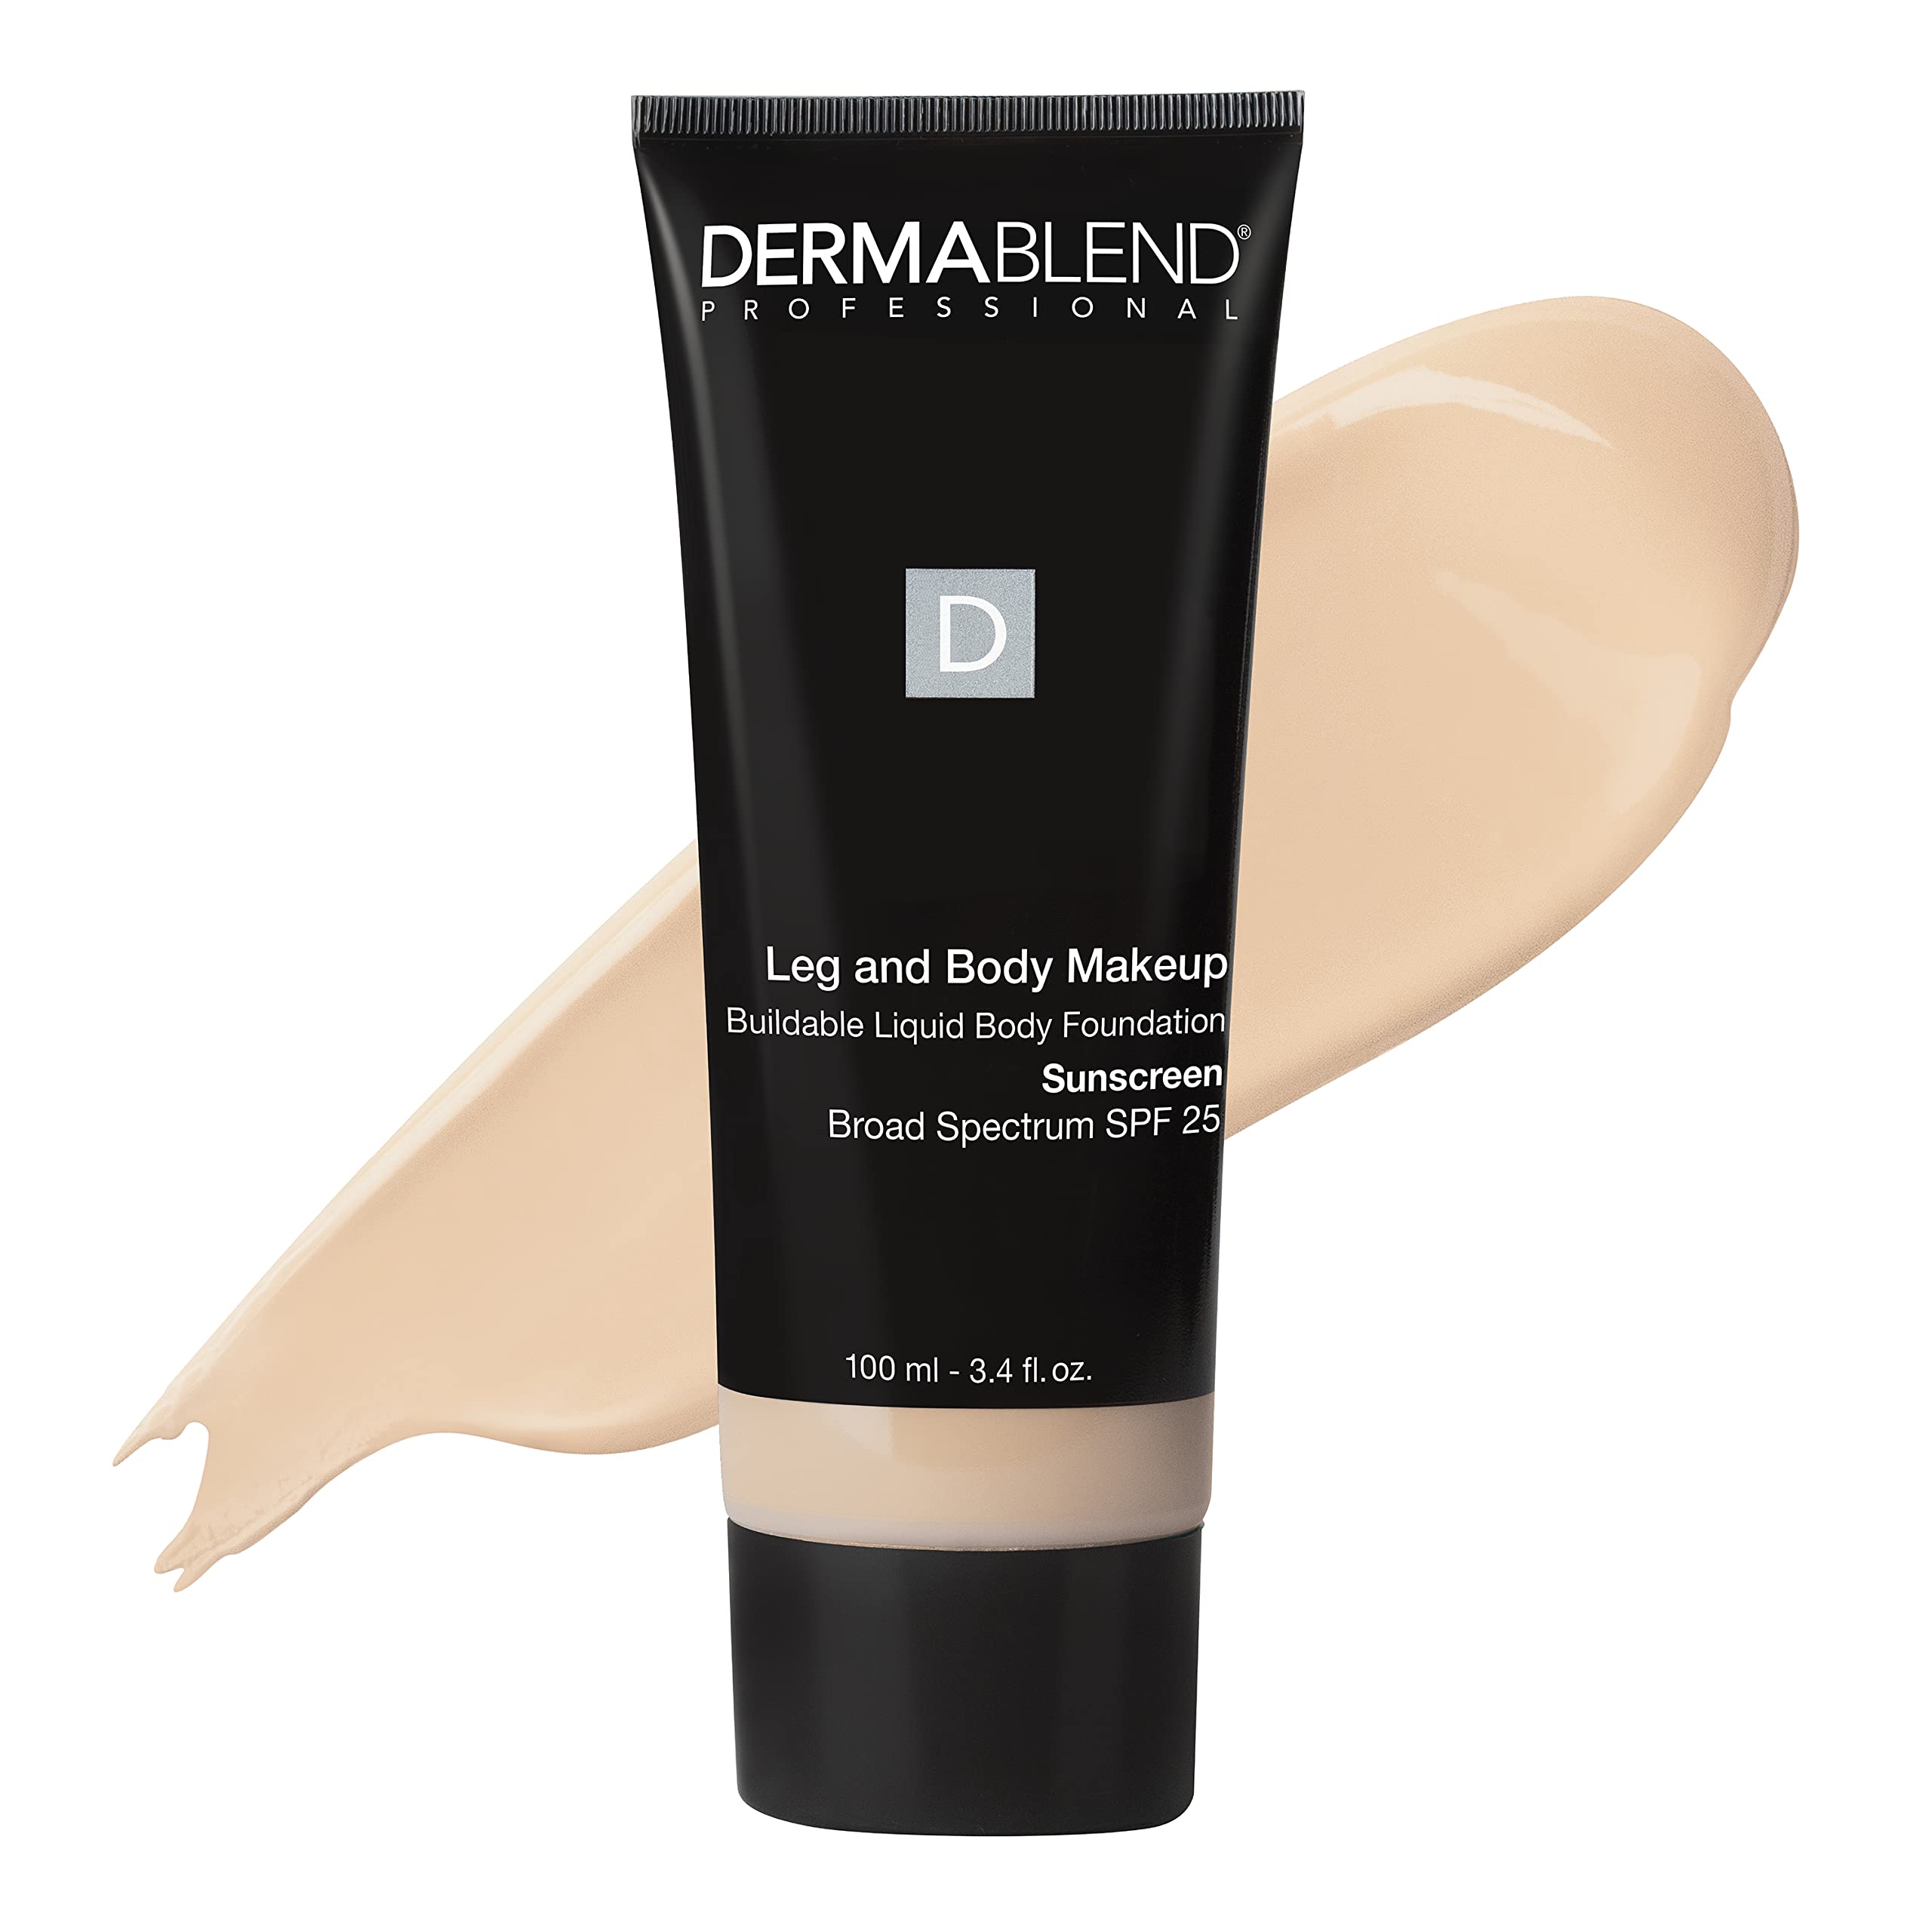 Dermablend Smooth Liquid Camo Foundation for Dry Skin with SPF 25, Medium Coverage Foundation and Hydrating Makeup